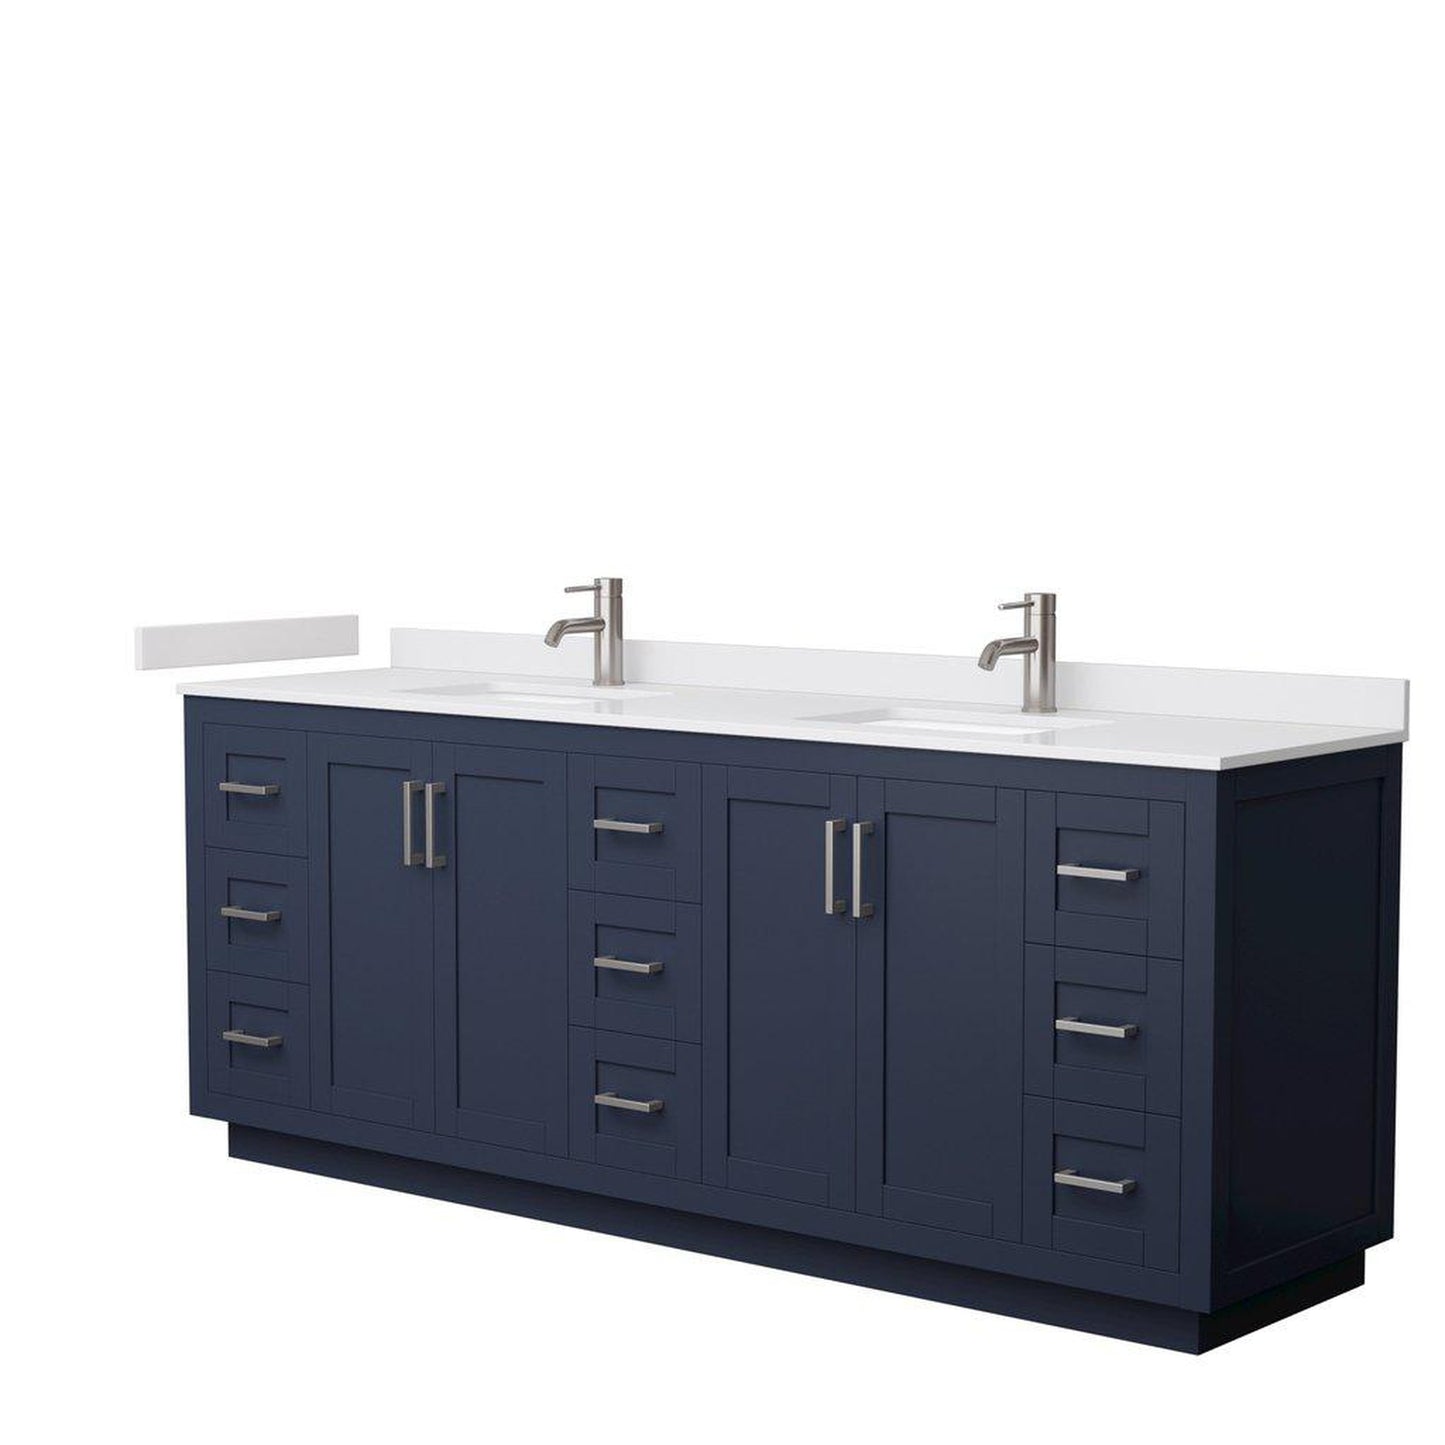 Wyndham Collection Miranda 84" Double Bathroom Dark Blue Vanity Set With White Cultured Marble Countertop, Undermount Square Sink, And Brushed Nickel Trim